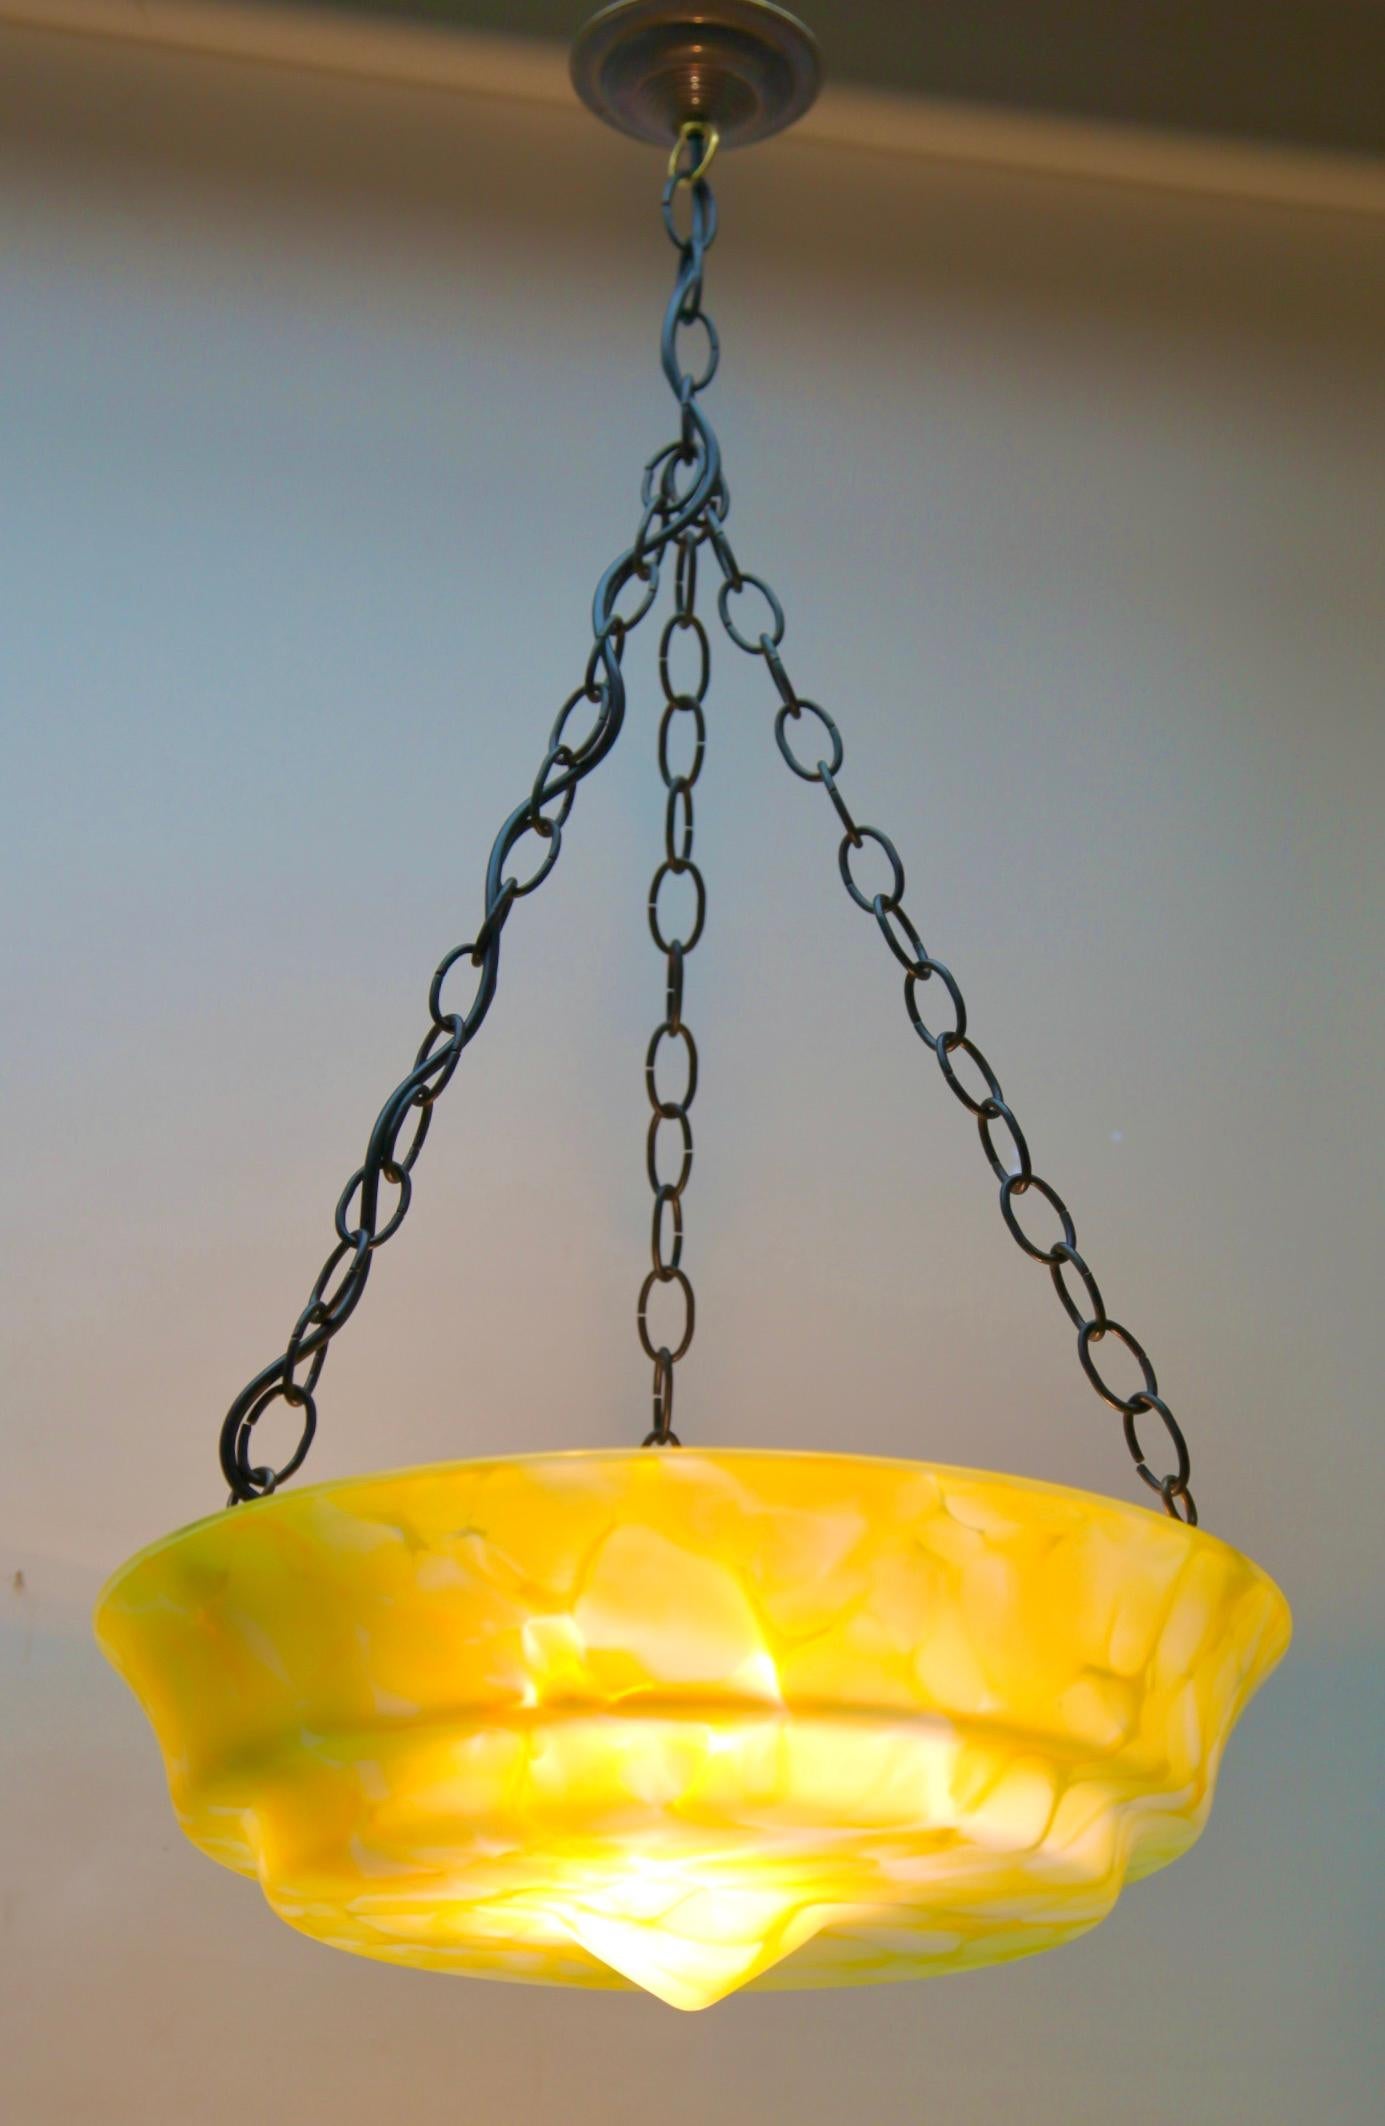 Art Deco Ceiling lamp

Photography fails to capture the simple elegant illumination provided by this lamp.

As service: We can adjust the lamp height for you in advance if needed. 

Pendant Ceiling light with Chain to hold a stylish Belgian Art Deco